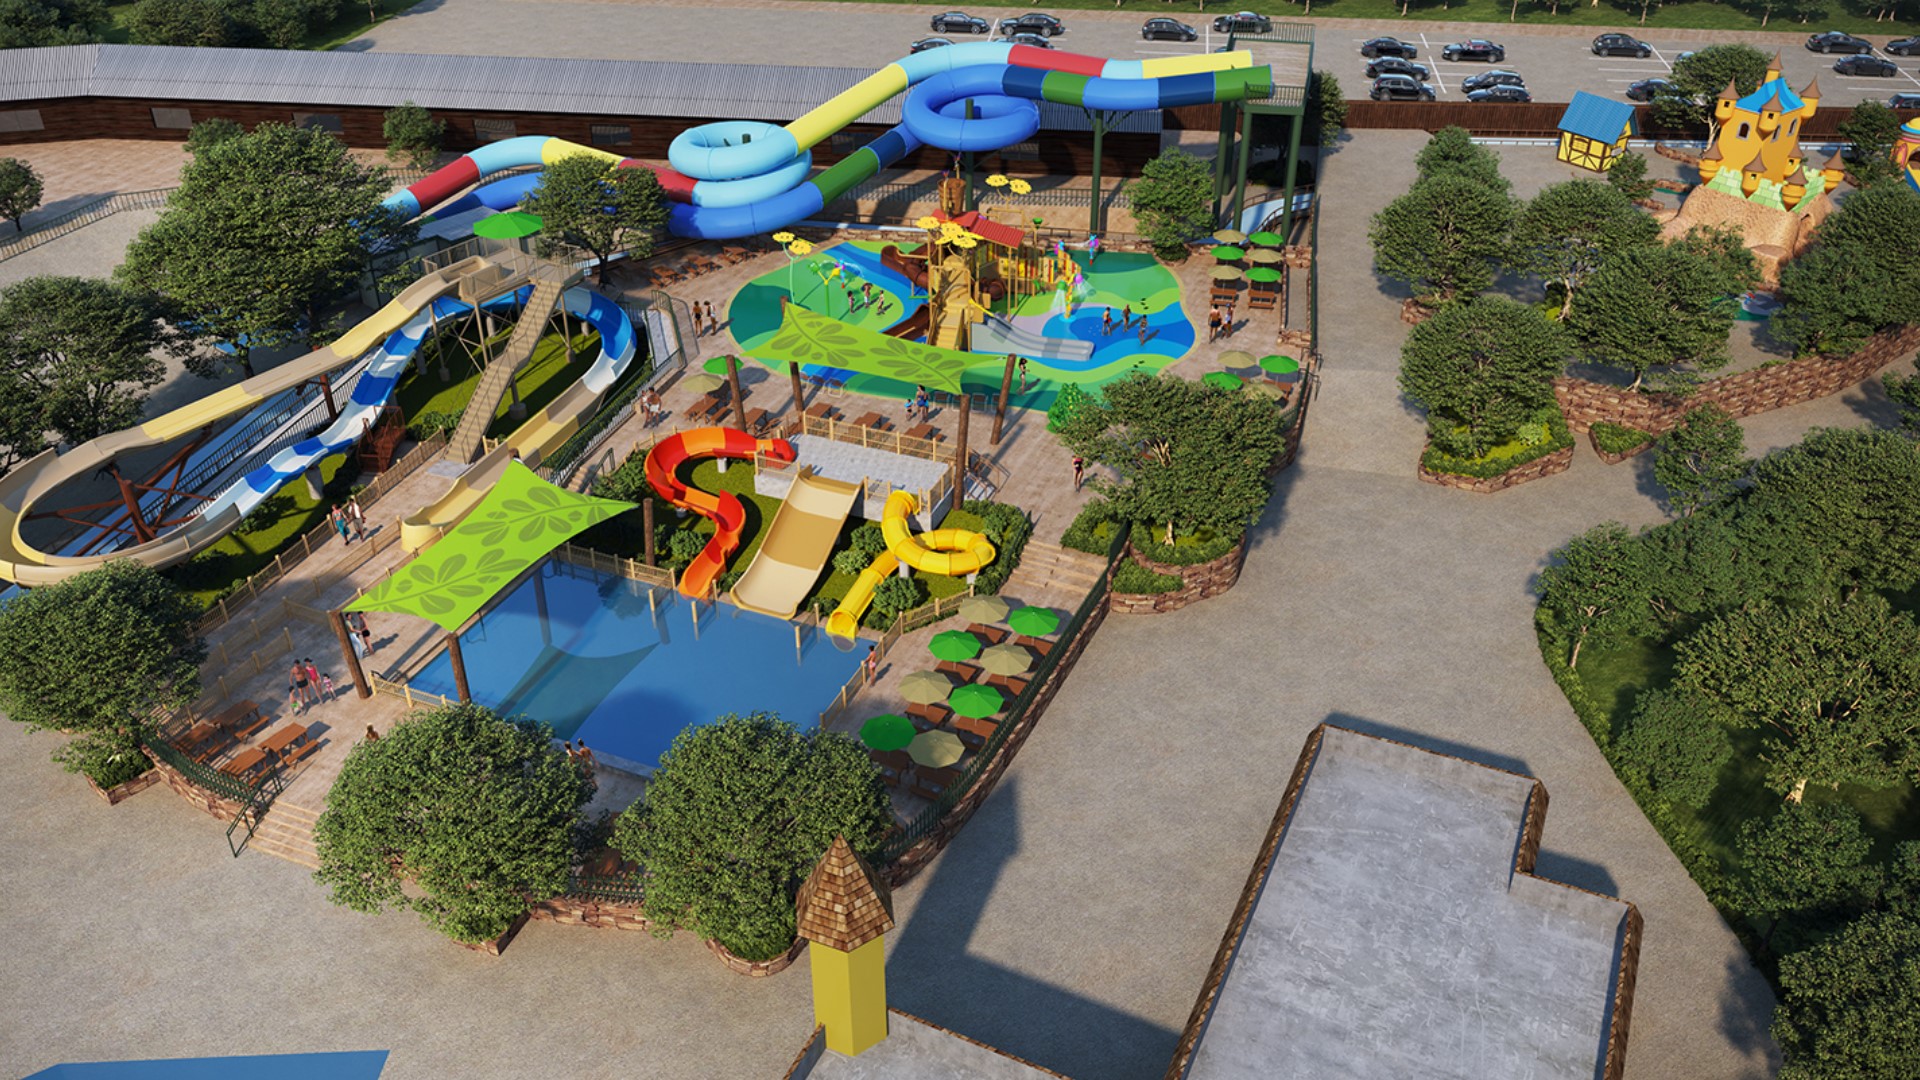 Kids 12 and under will enjoy all-new water slides, interactive water features, spray toys and more!